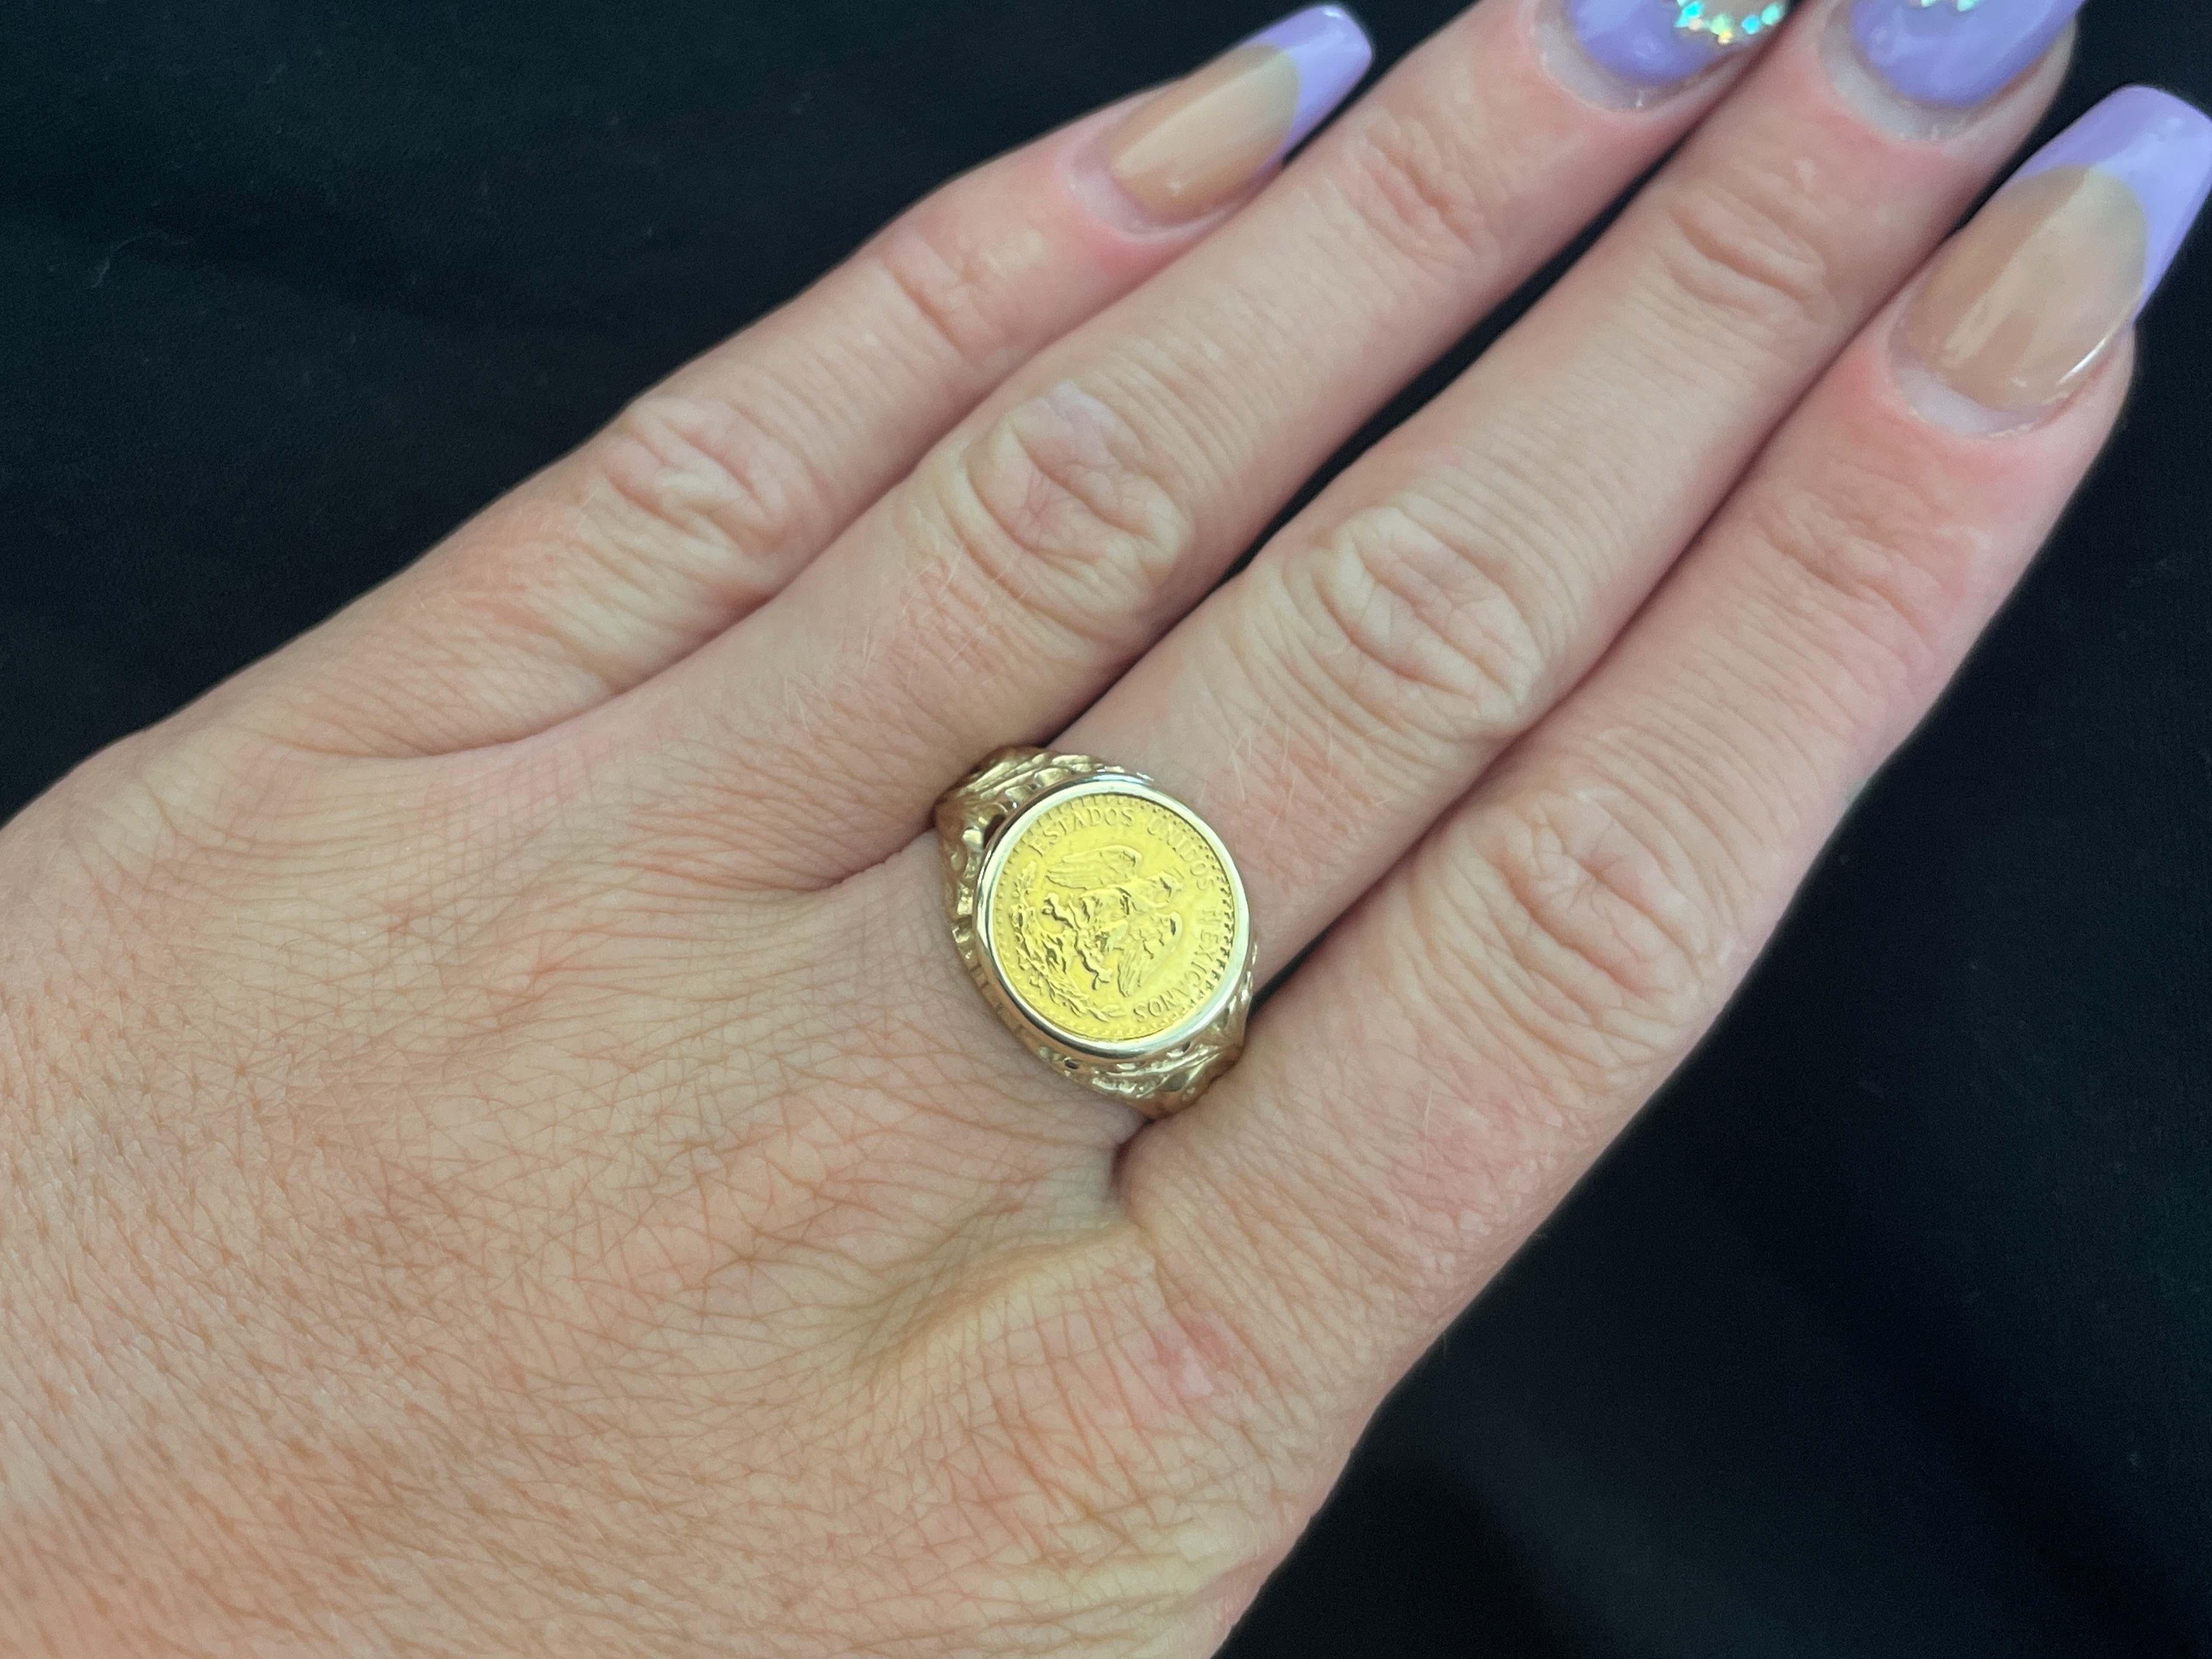 Mens Gold 2.00 Mexican Peso Coin Pinky Ring, 10K Yellow Gold. Size 11.5
Vintage men's 2.00 gold Mexican peso Coin Ring in 10K yellow gold. This beautiful ring features a 1945 2.00 (Dos Pesos) Gold Mexican coin set in a smooth bezel. The ring